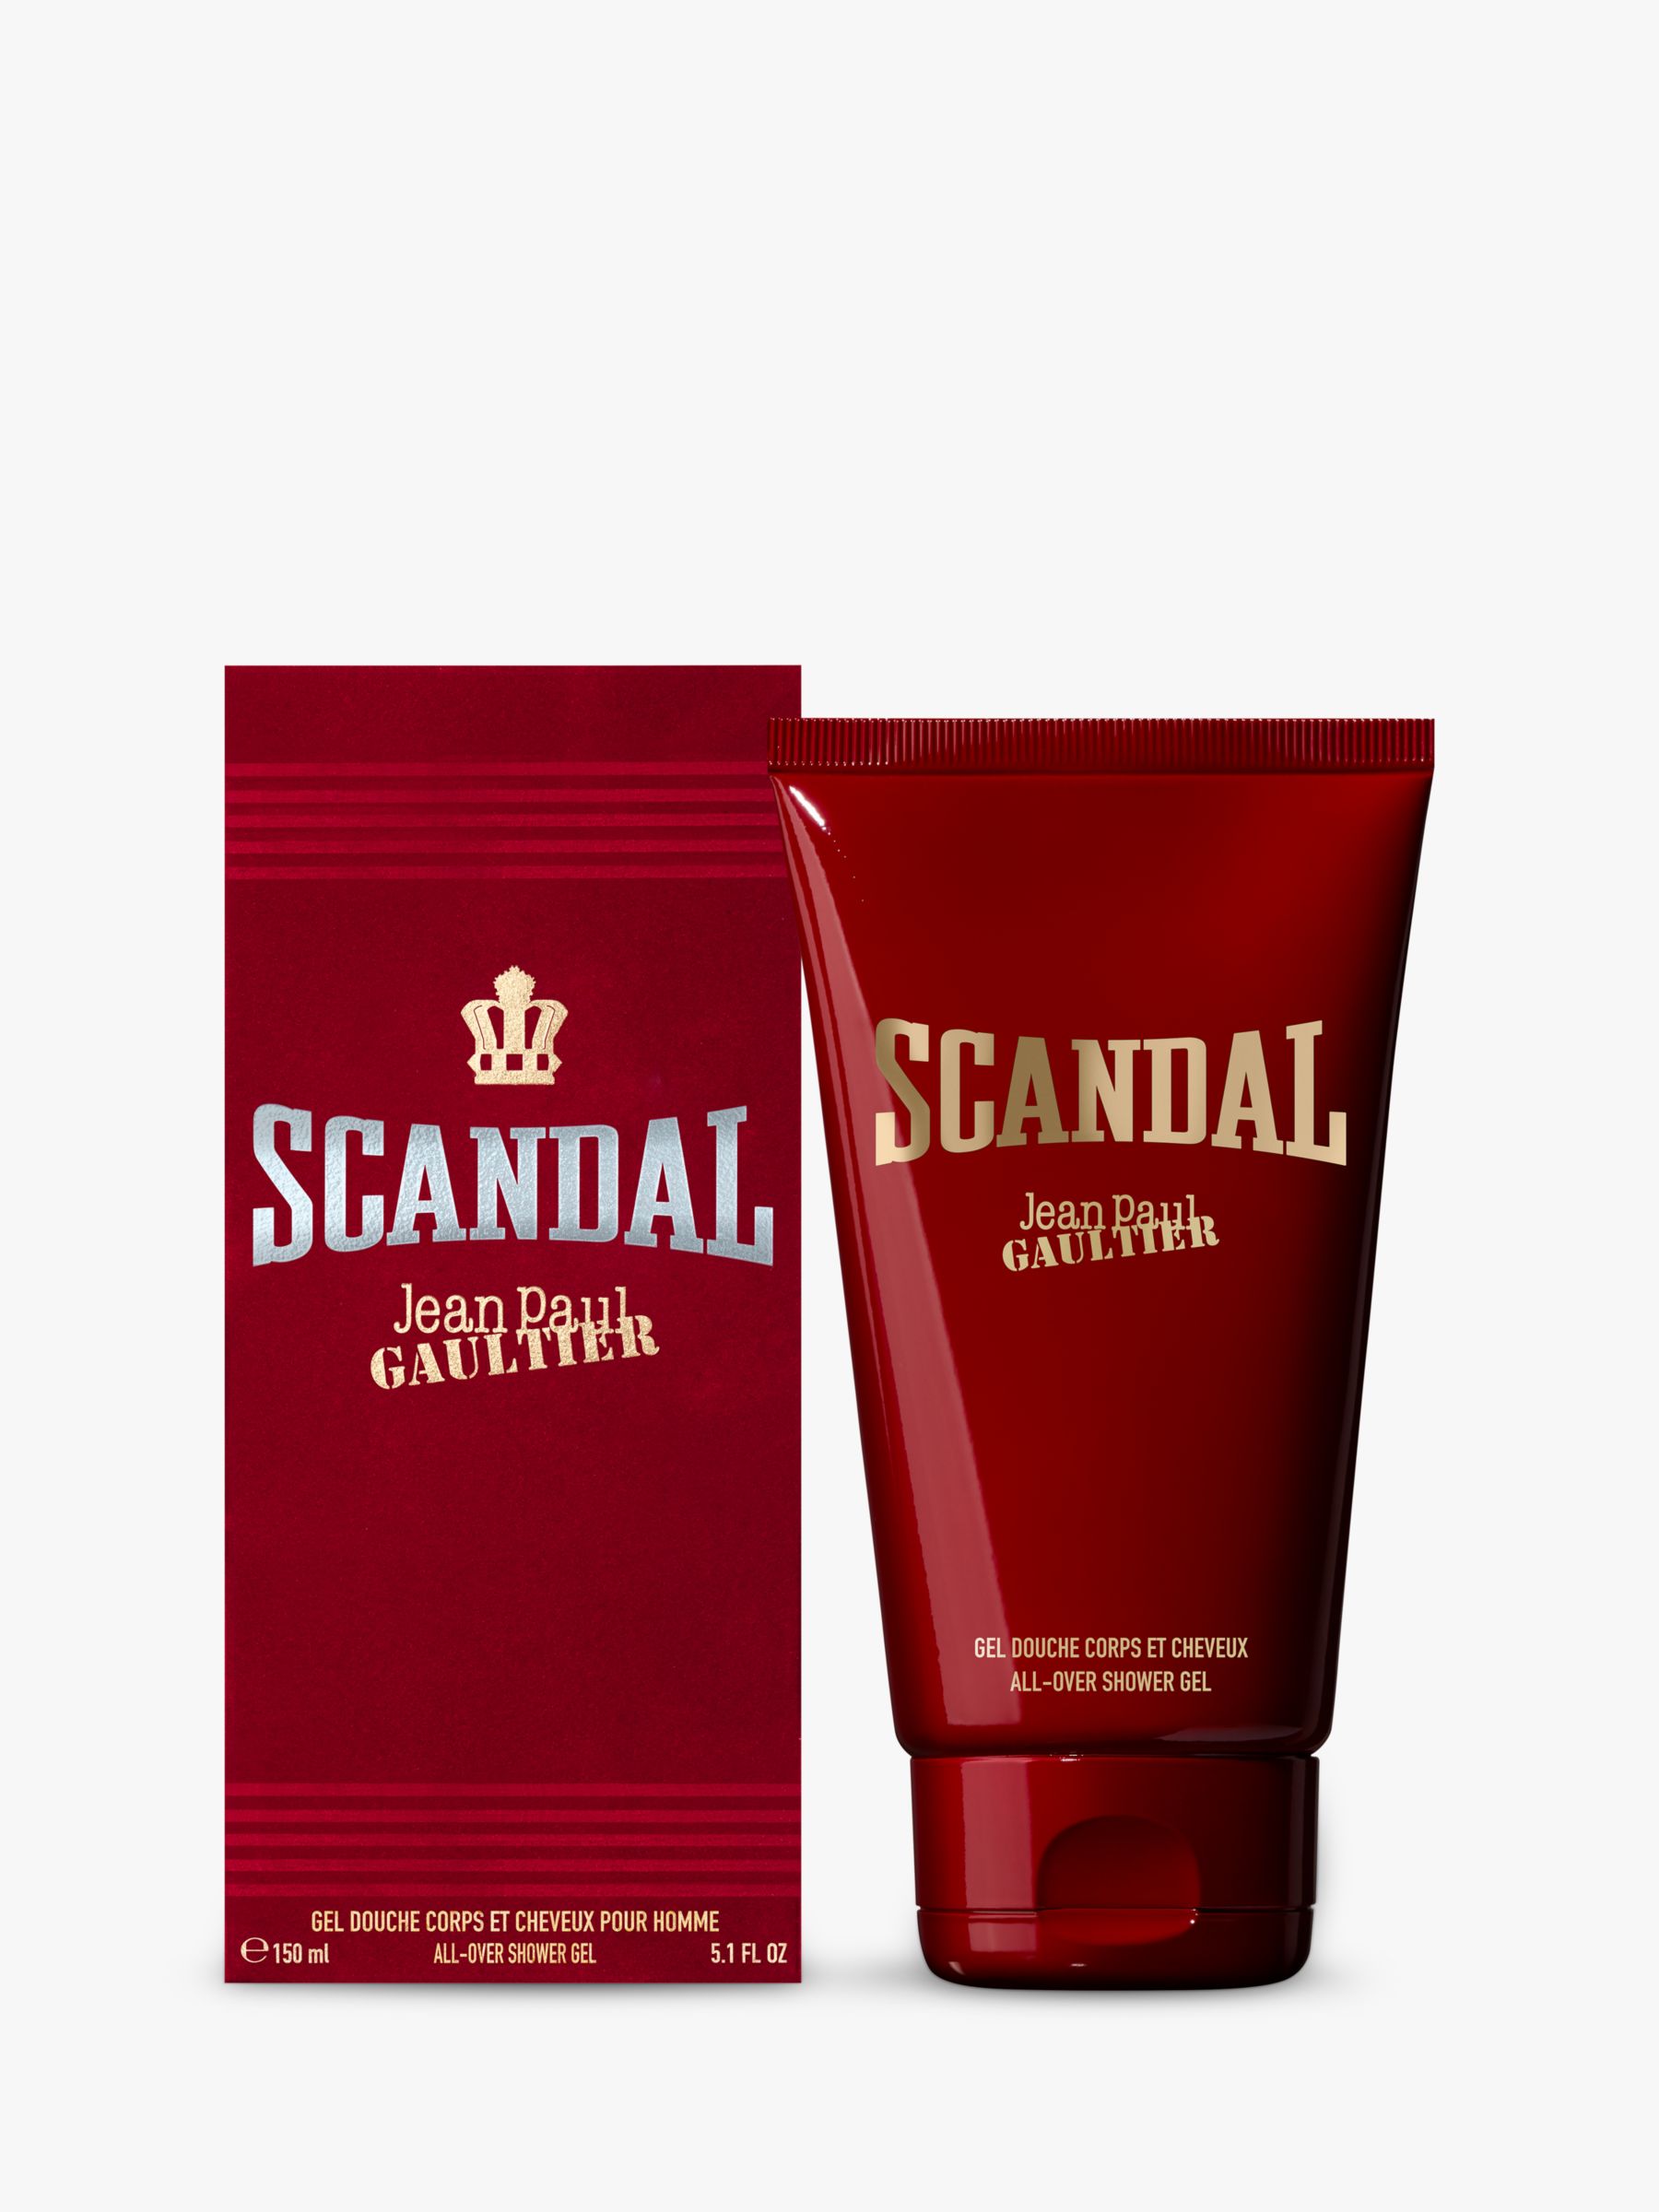 Jean Paul Gaultier Scandal Pour Homme All-Over Shower Gel, 150ml 2